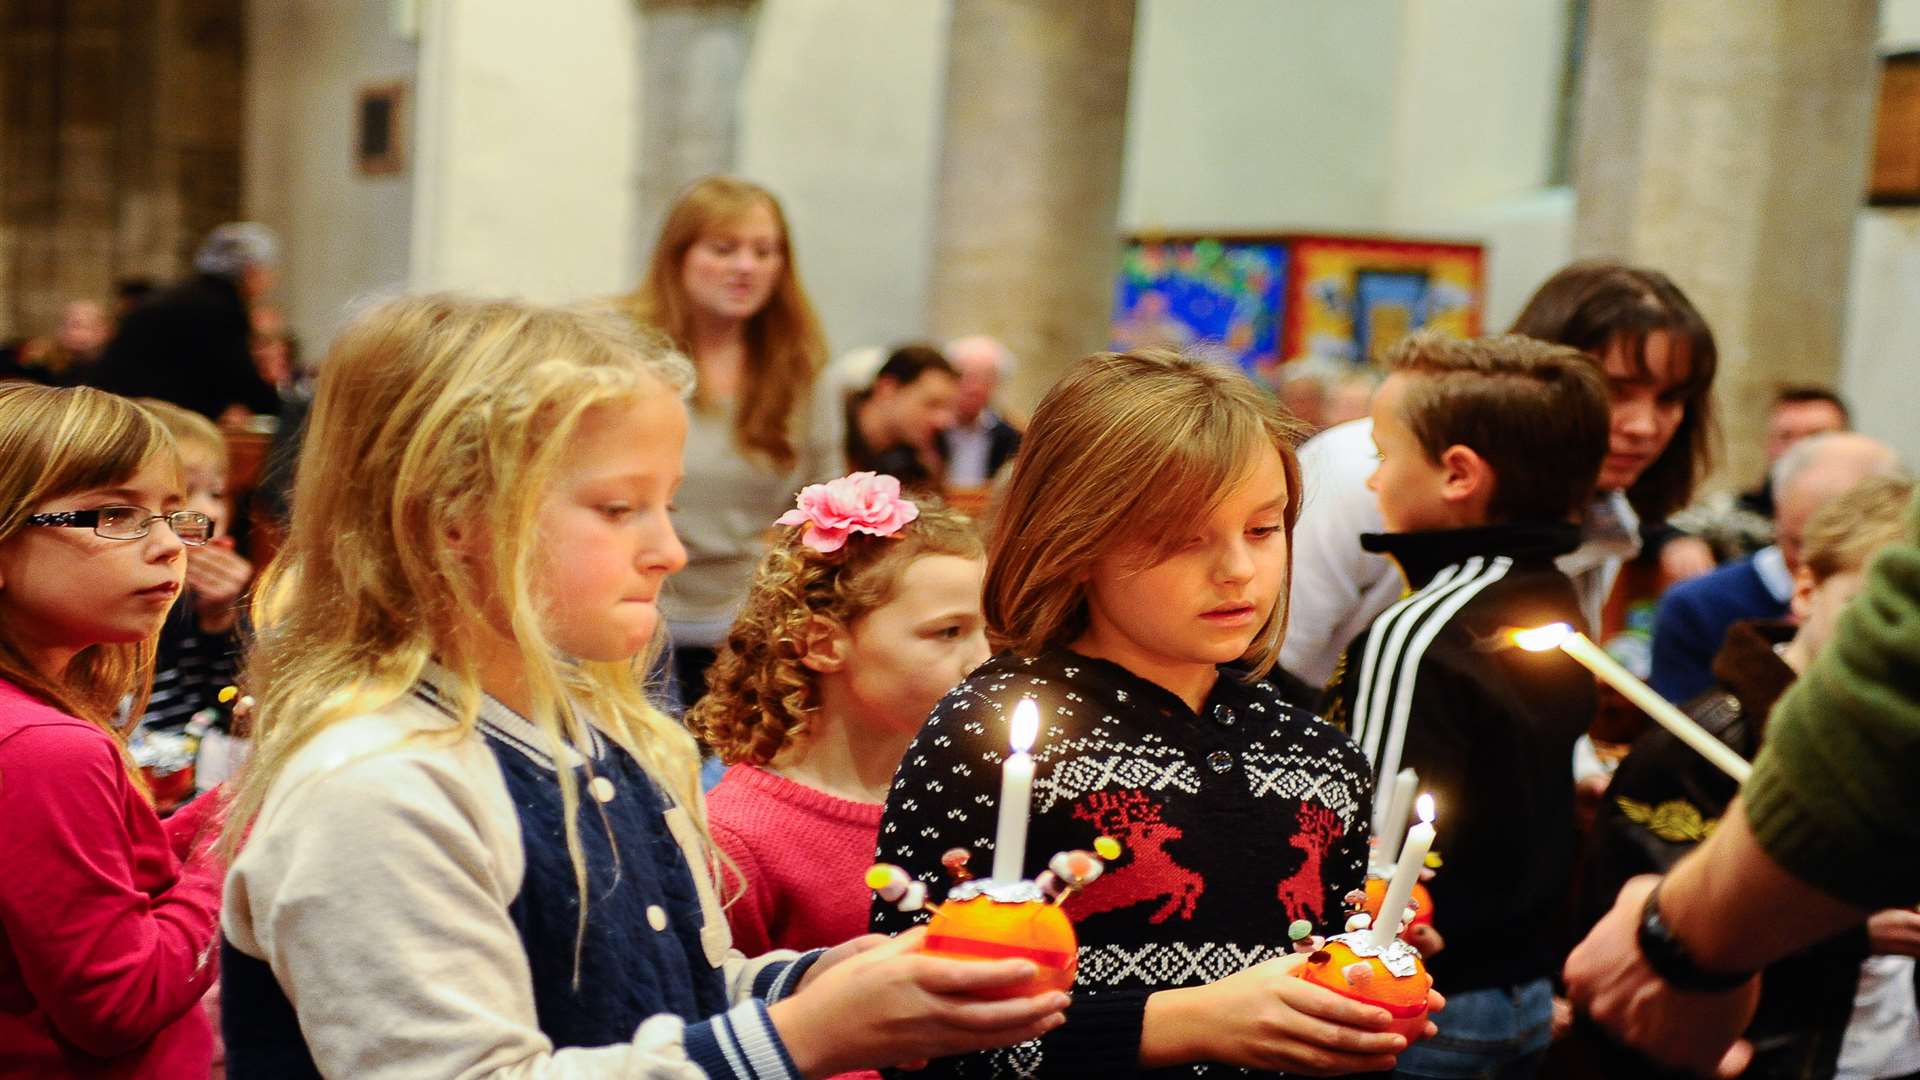 A recent Christingle service at St Mildred's Church, Tenterden